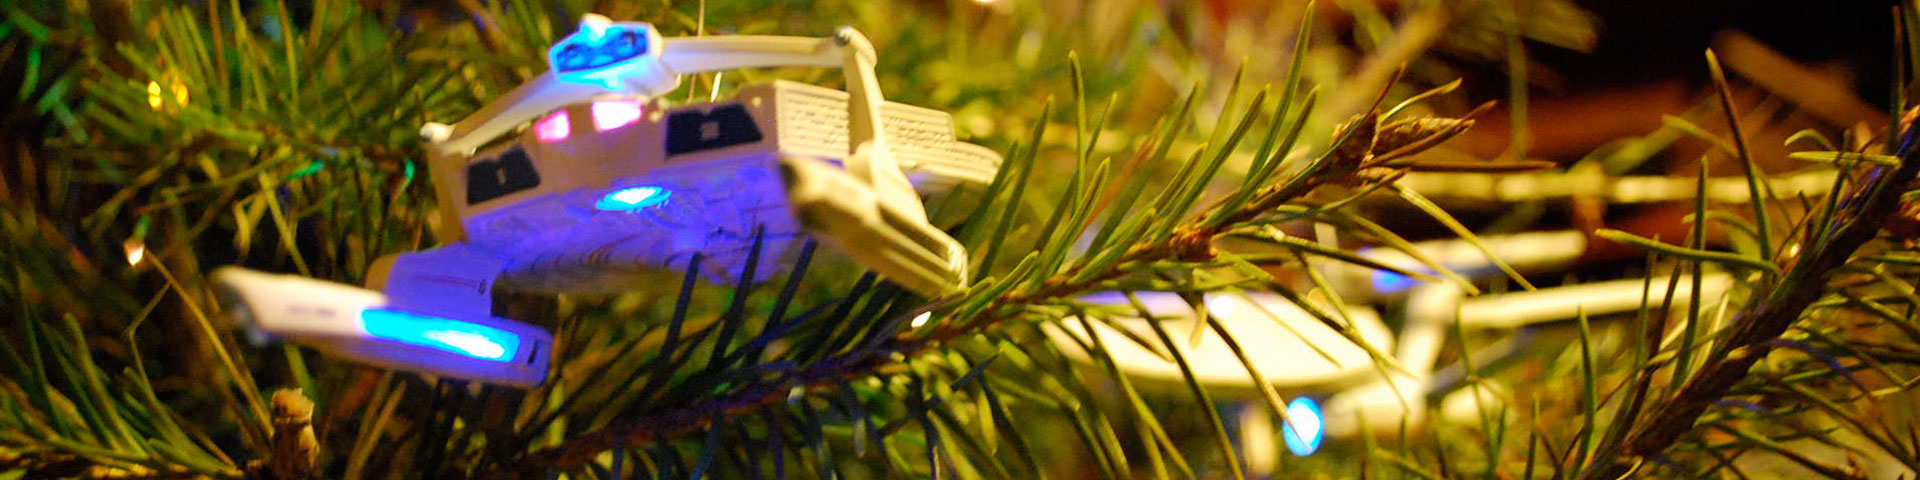 A close up shot of a starship ornament in an evergreen tree. Another starship, blurry in appearance, is in the background.